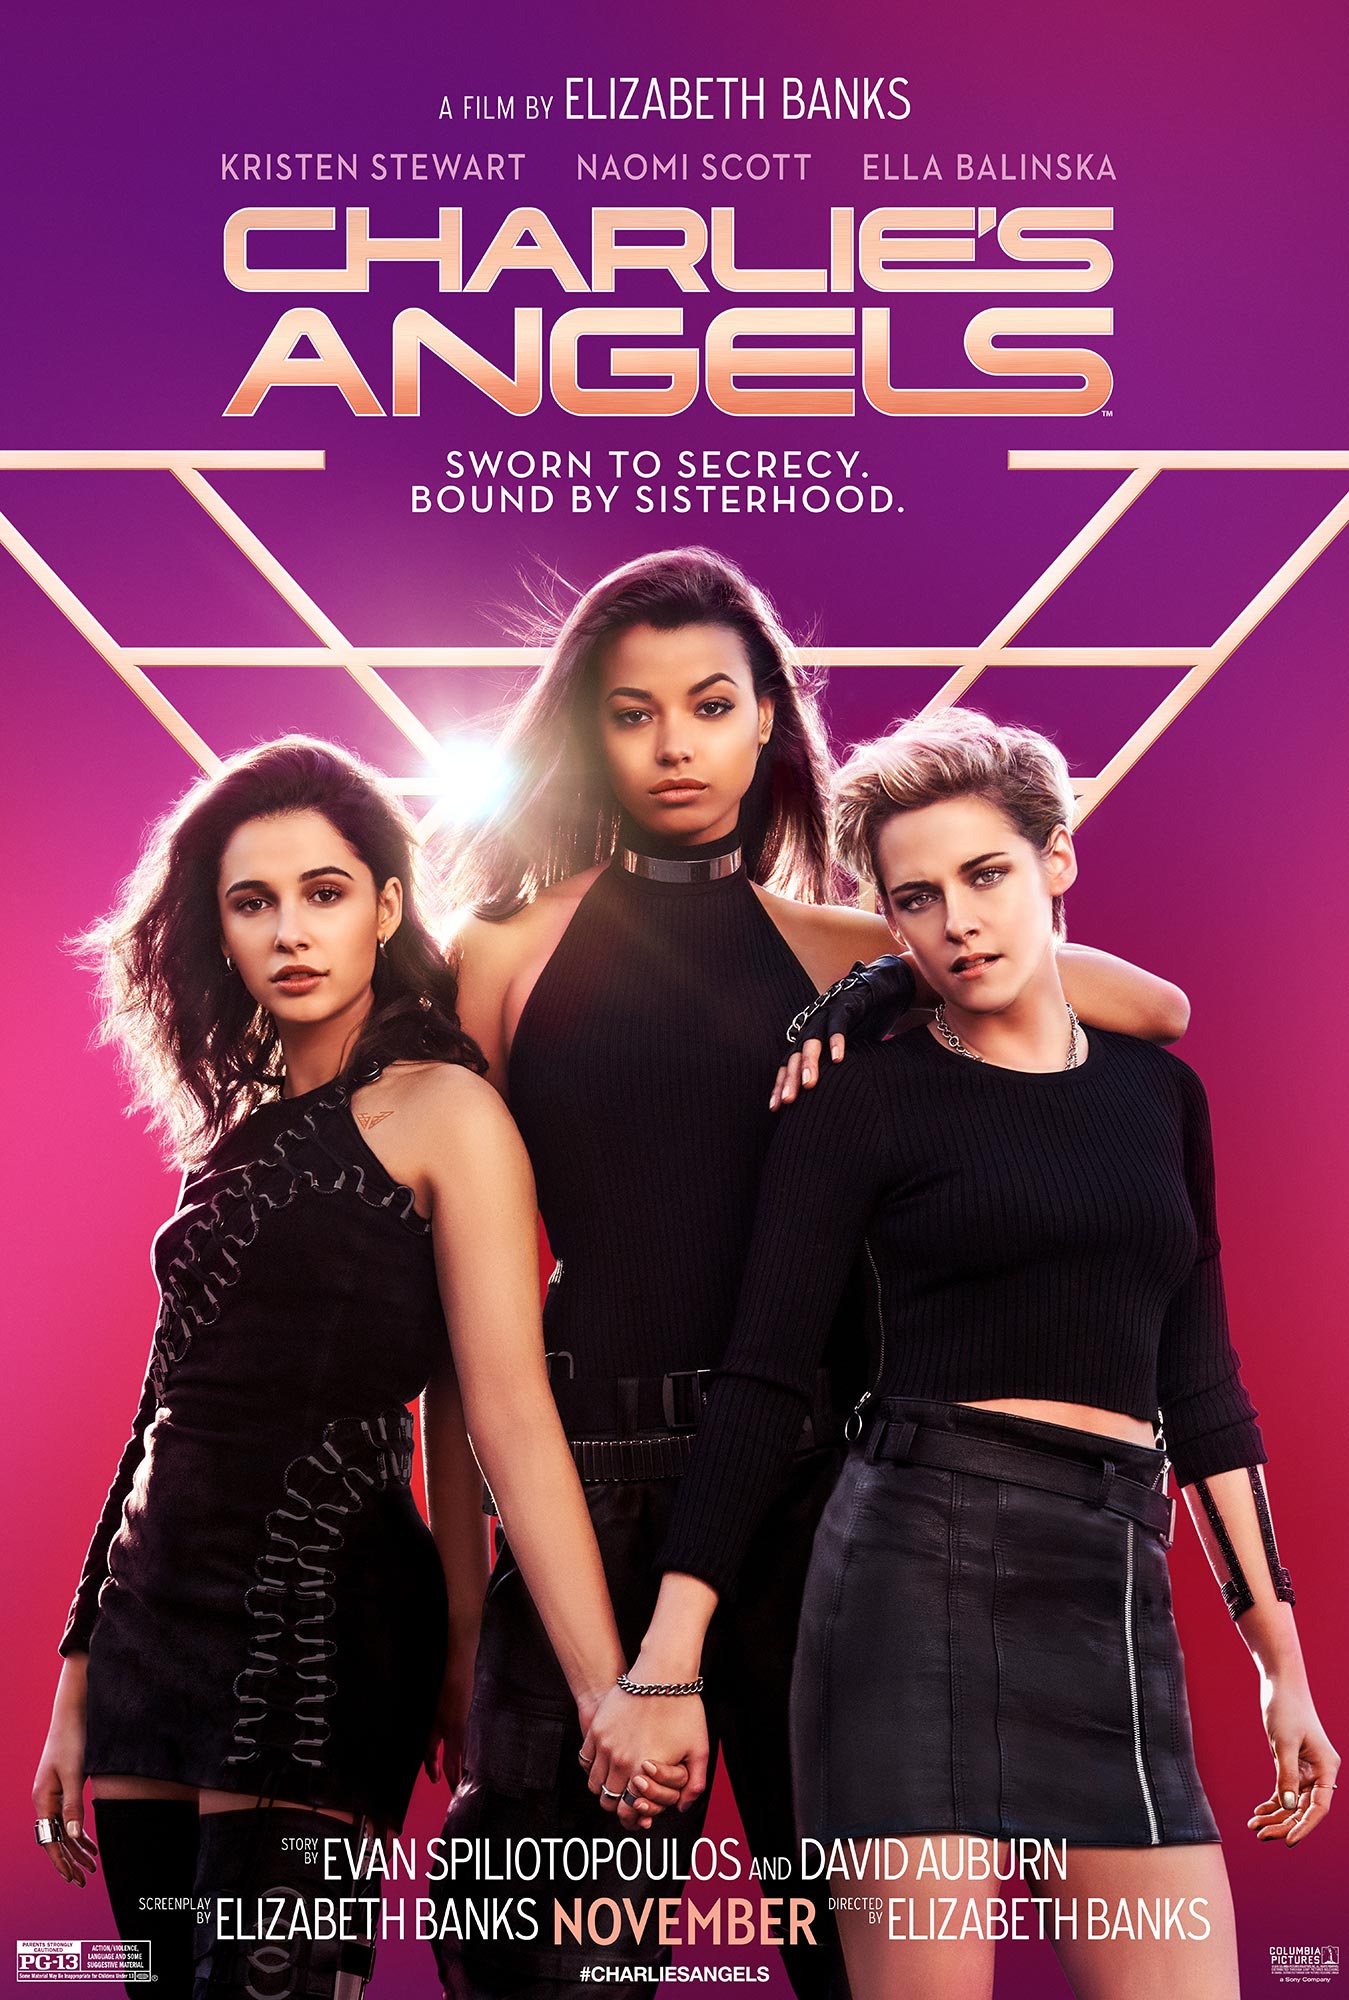 Charlies Angels Official Trailer 2